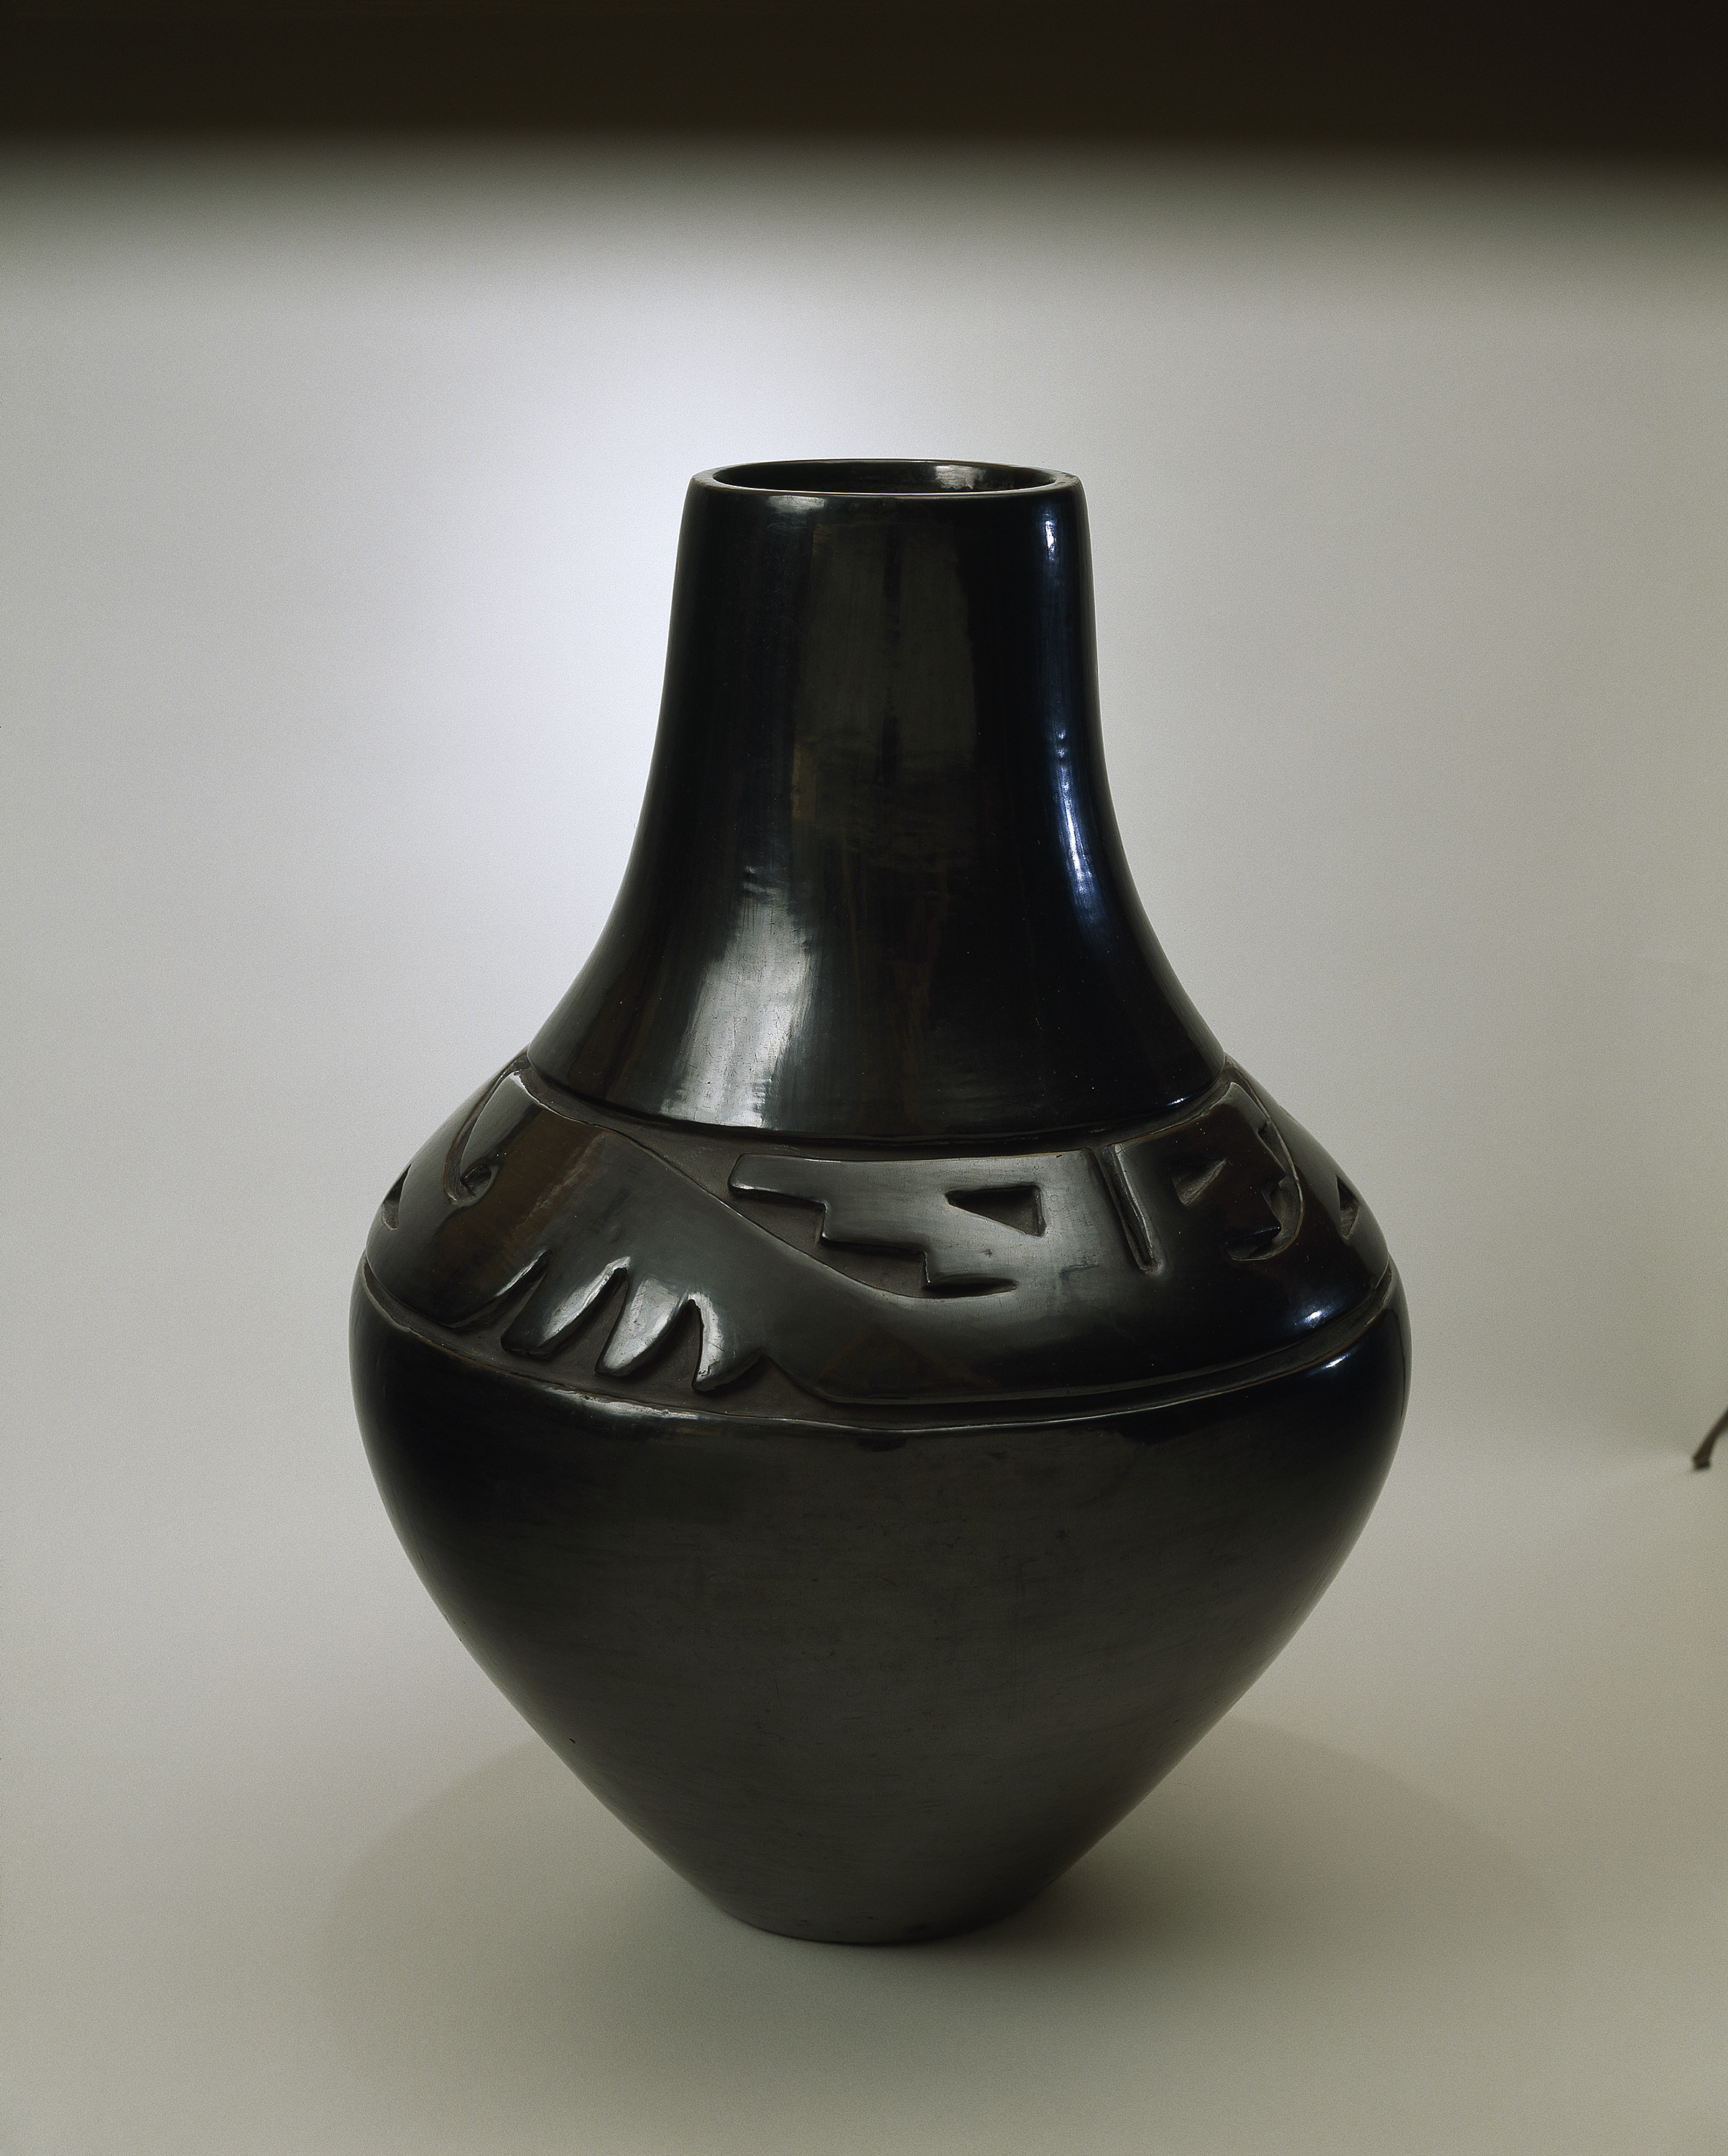 Blackware pottery vessel with tall neck and broad shoulder tapering to a narrow base. The flawless, polished black surface is adorned with deep relief carvings of stylized wings and geometric designs on the shoulder.